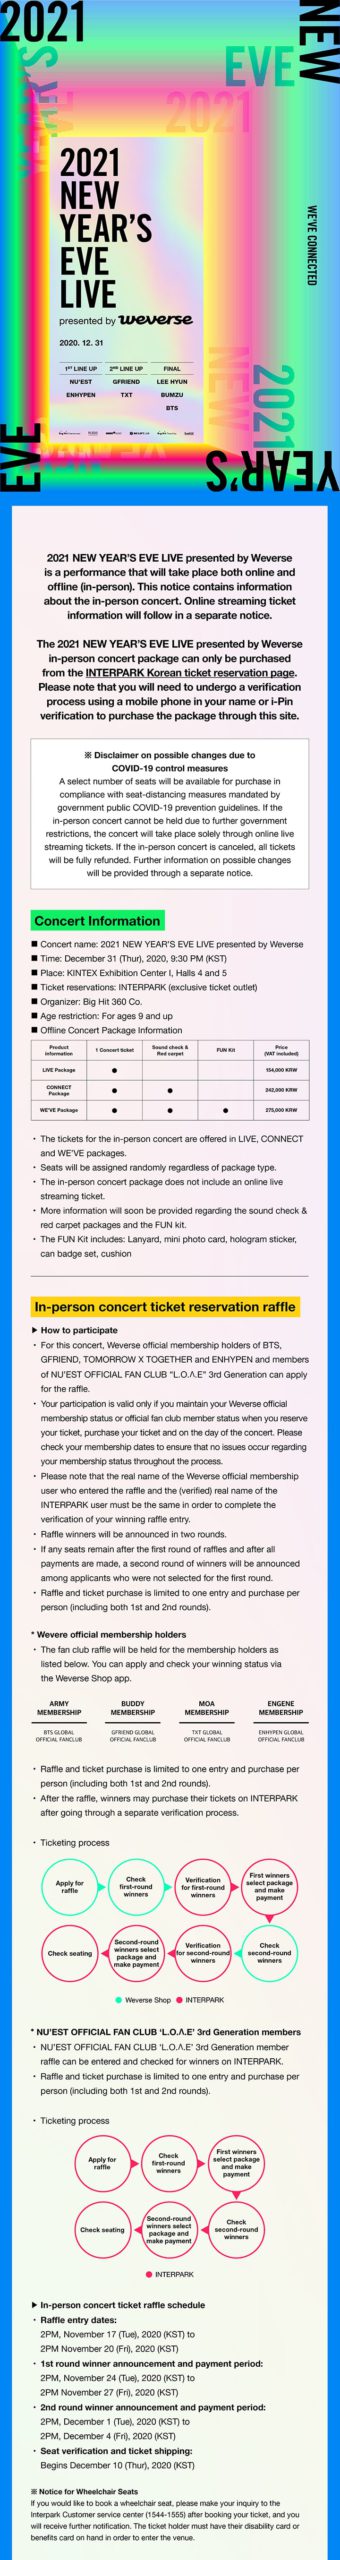 Big Hit 2021 New Year's Eve ticket info